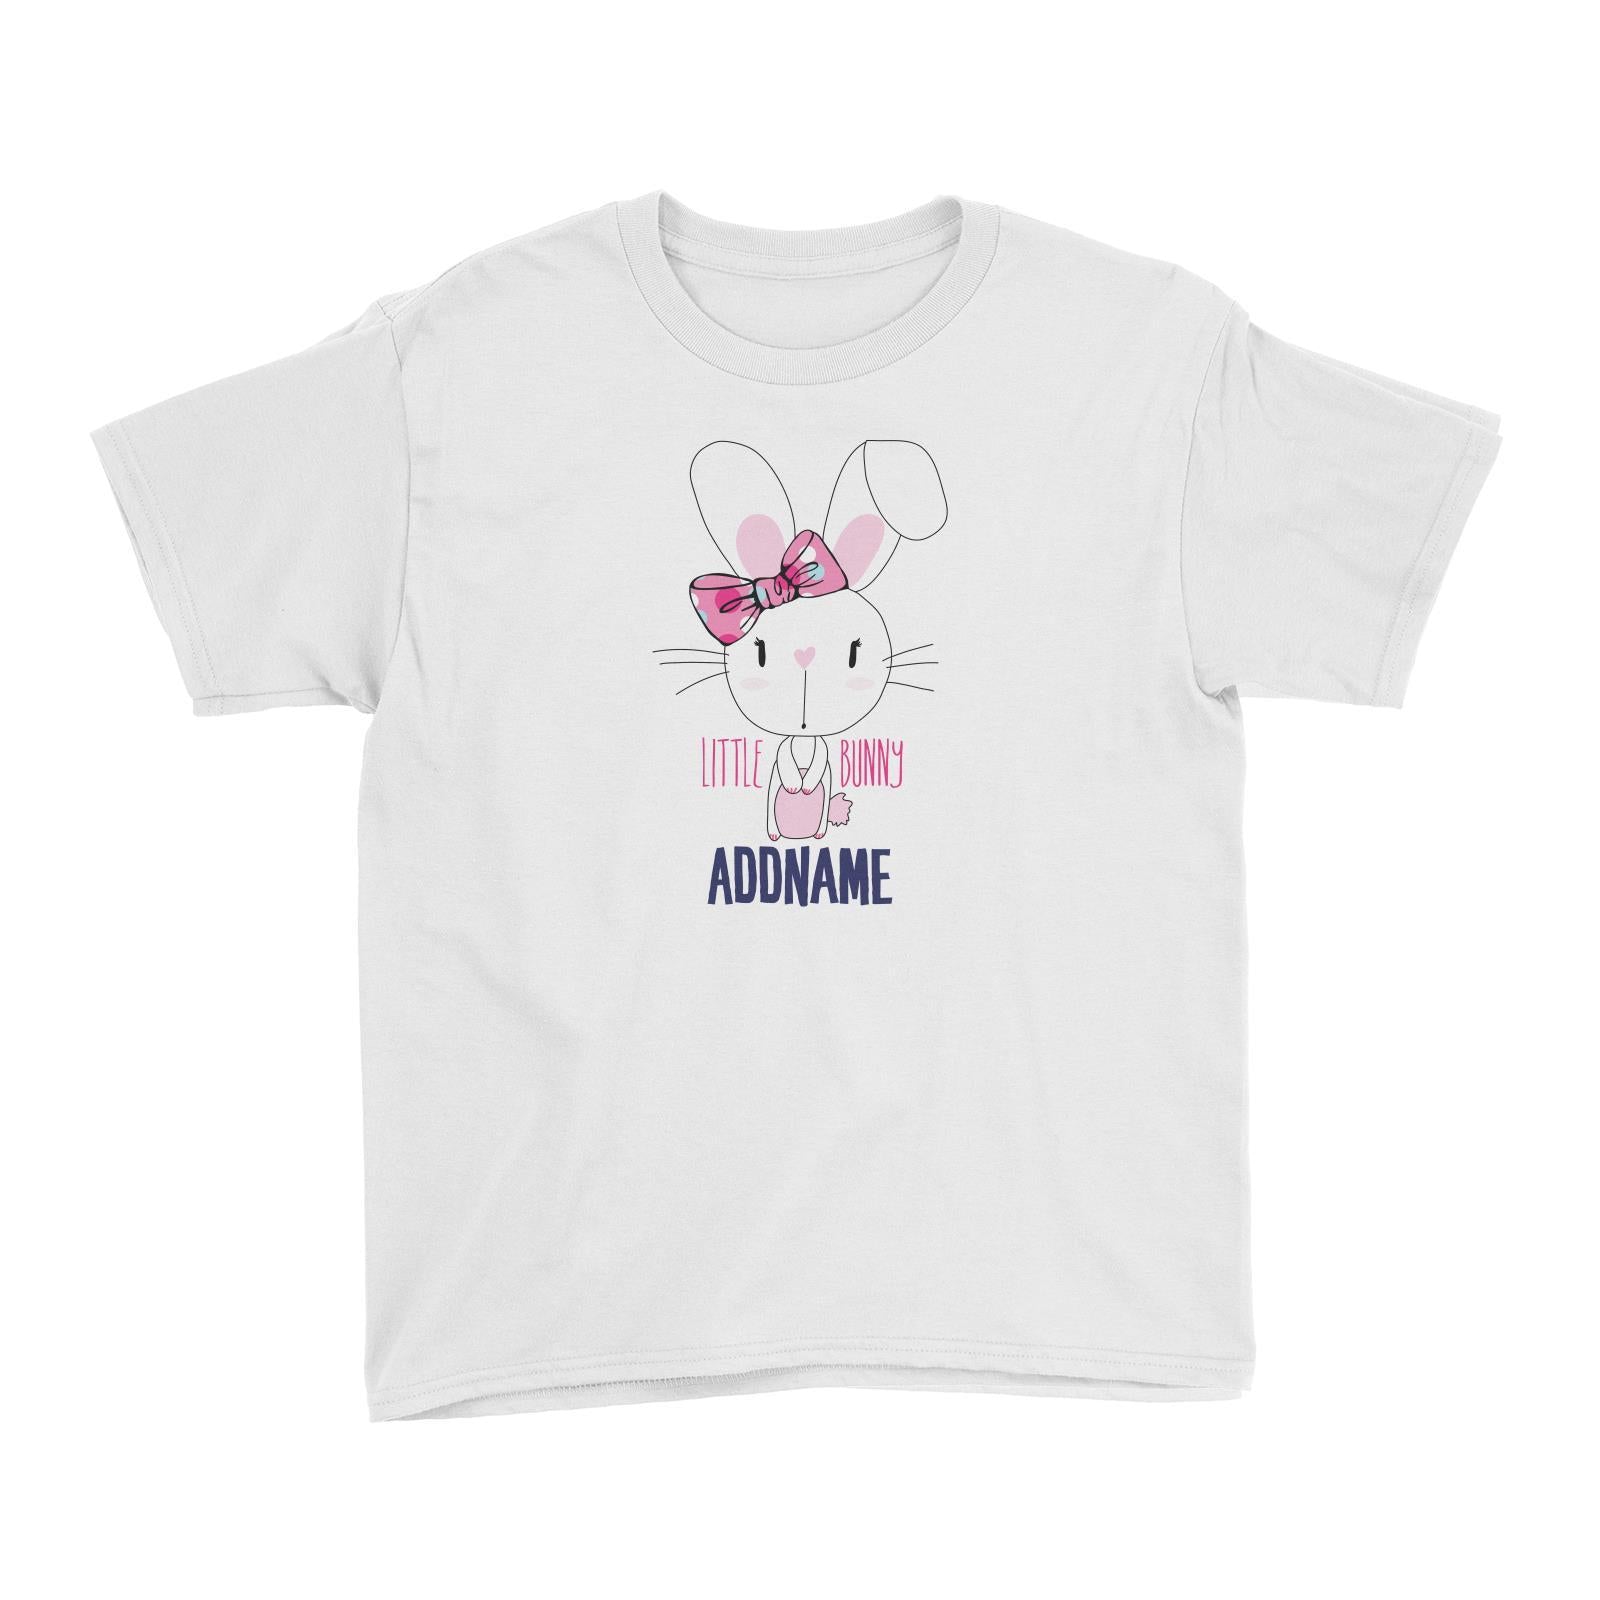 Cool Vibrant Series Little Bunny With Ribbon Addname Kid's T-Shirt